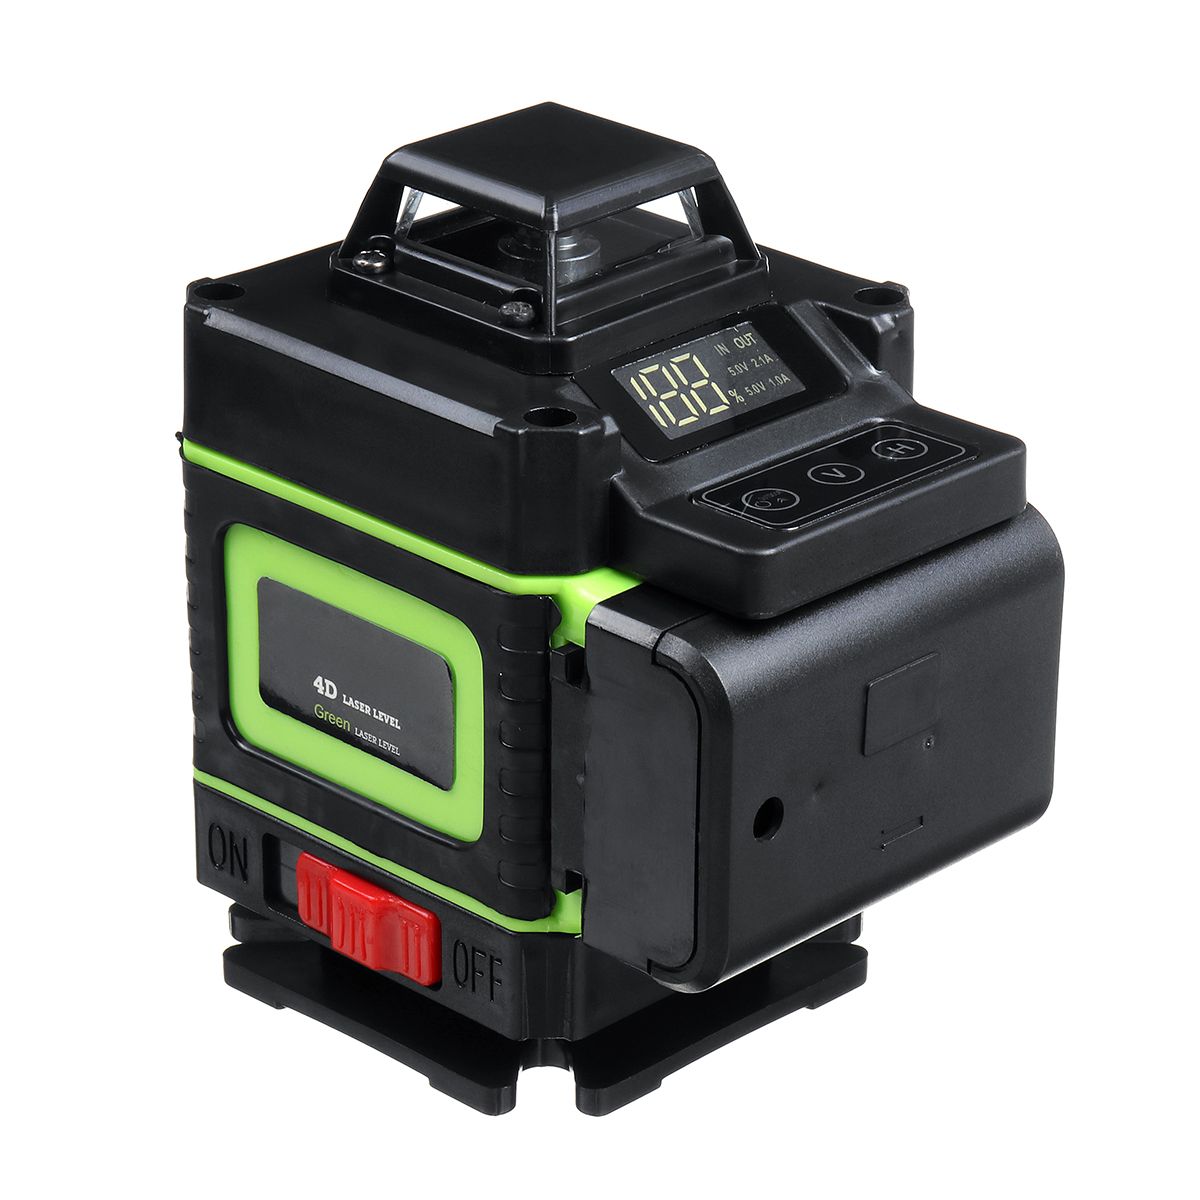 16-Line-Strong-Green-Light-3D-Remote-Control-Laser-Level-Measure-with-Wall-Attachment-Frame-1691974